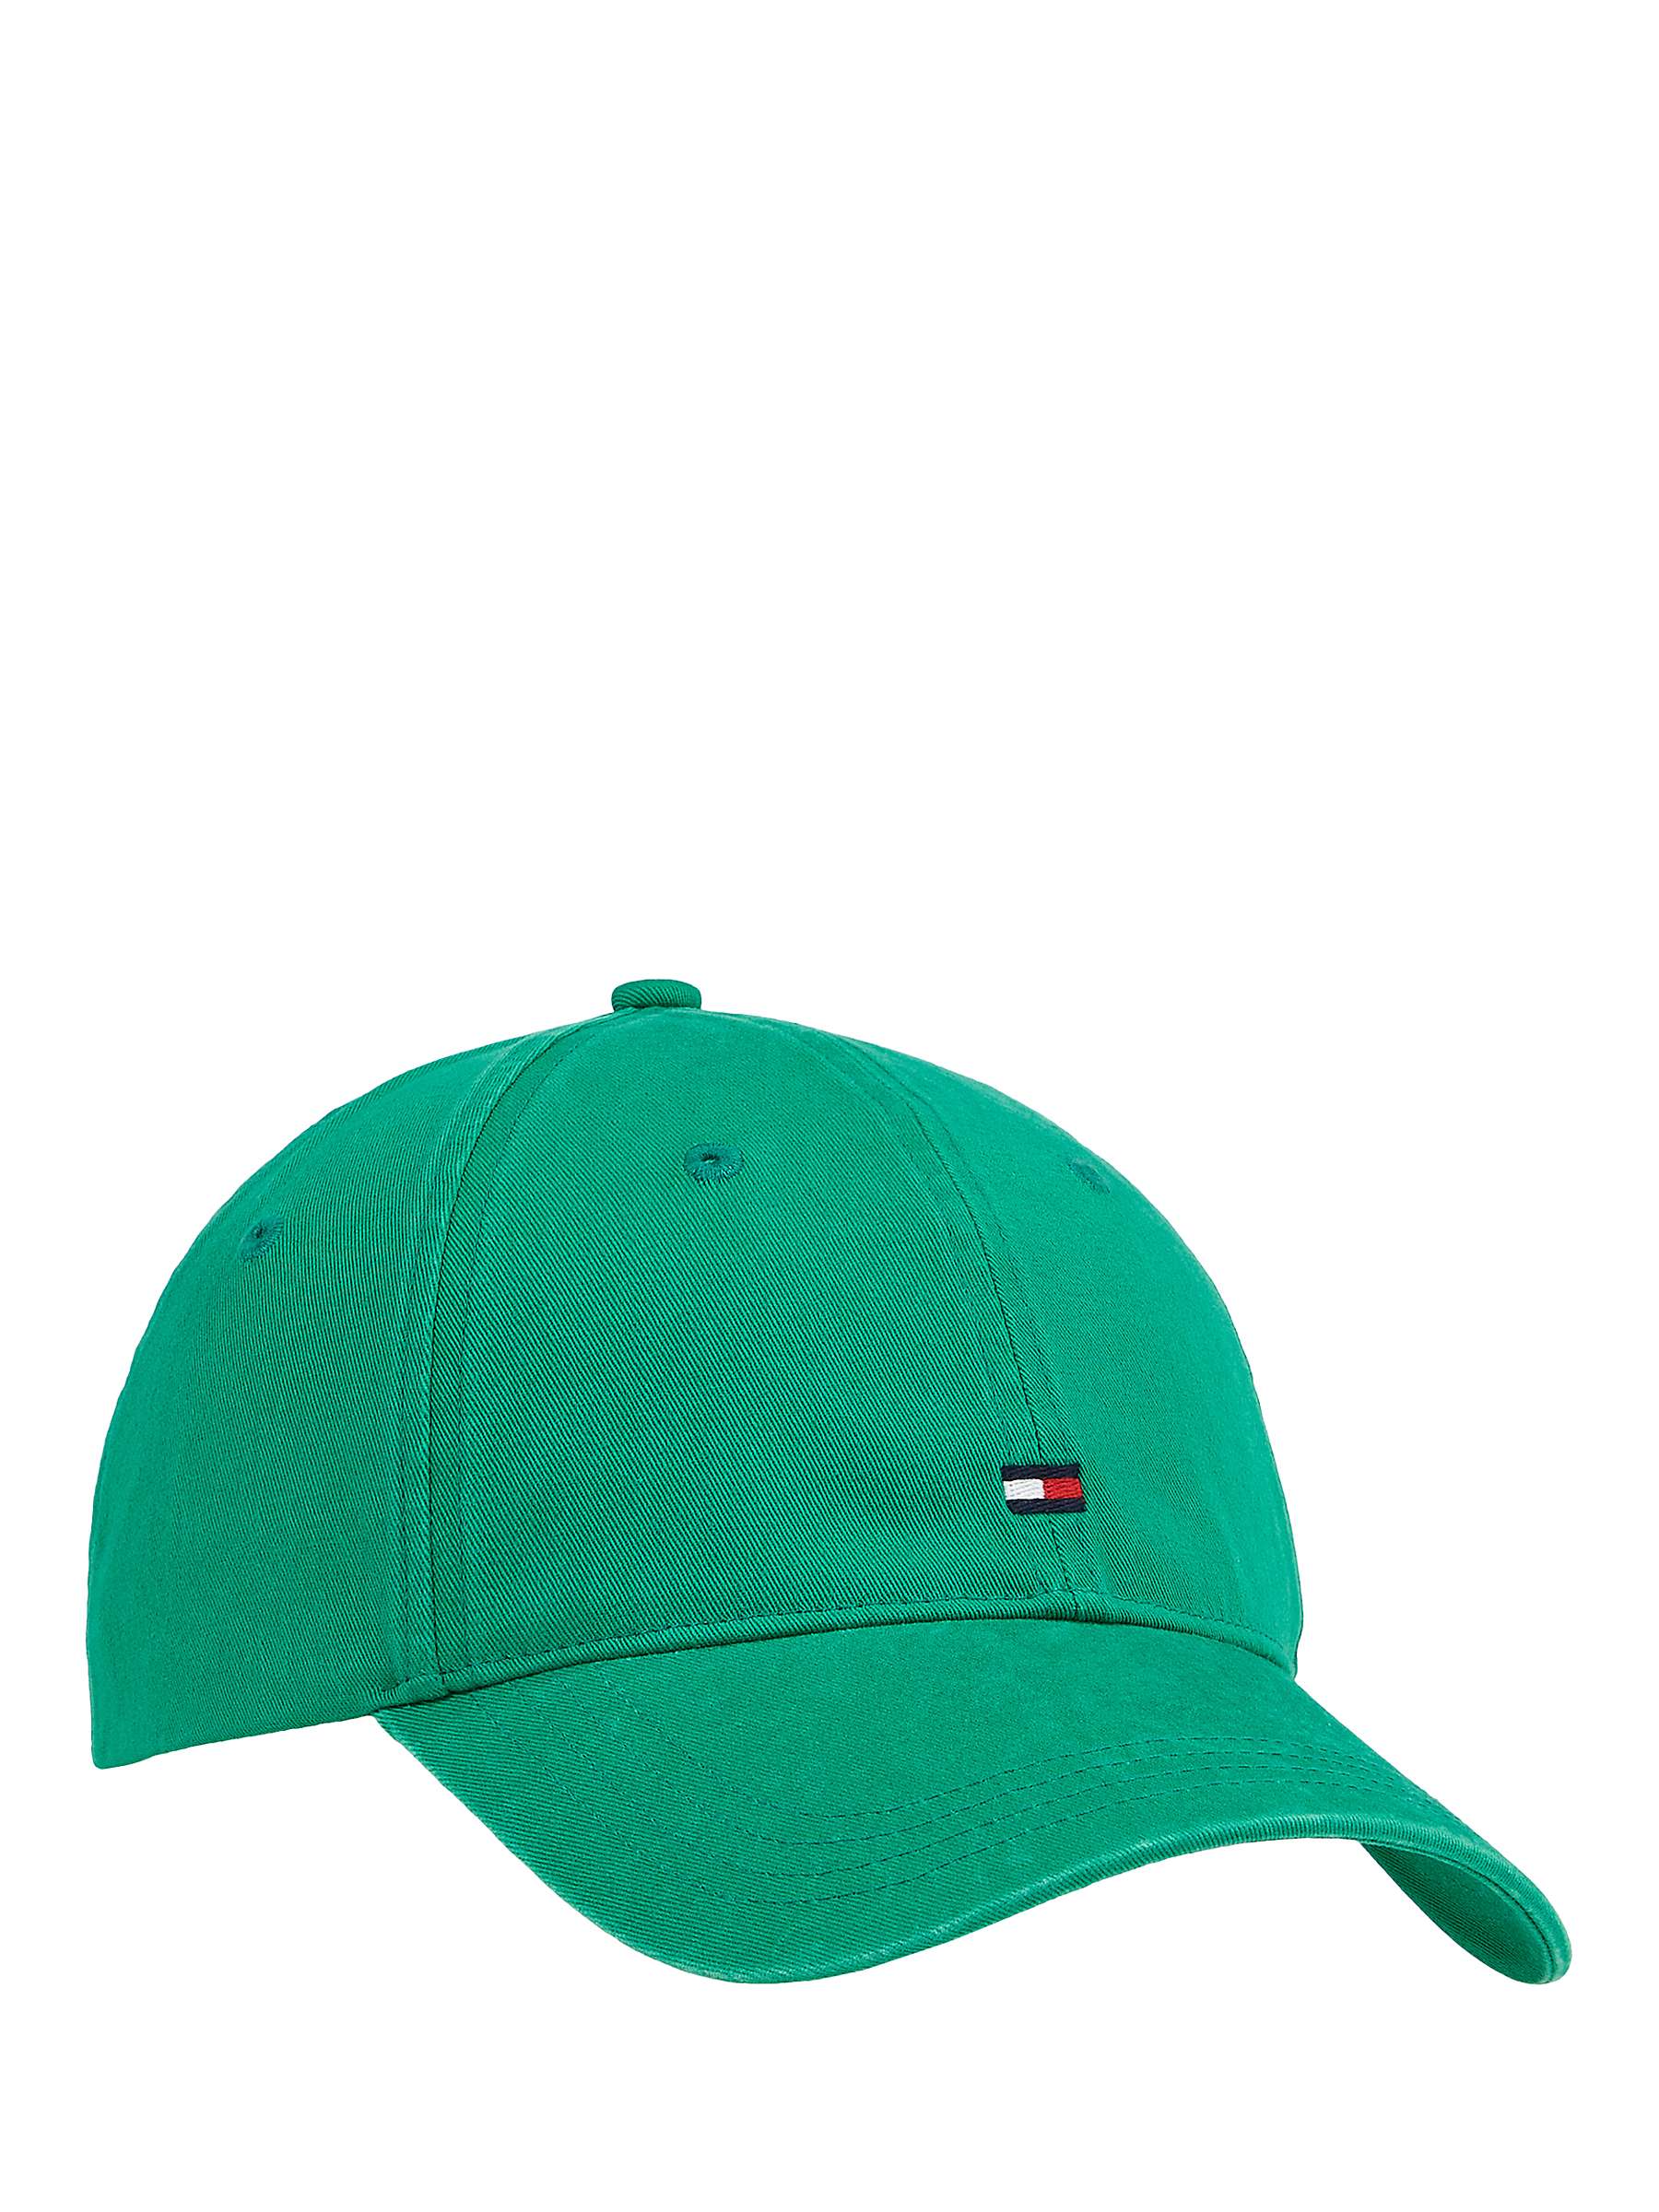 Buy Tommy Hilfiger Essential Flag Soft Cap, Olympic Green Online at johnlewis.com